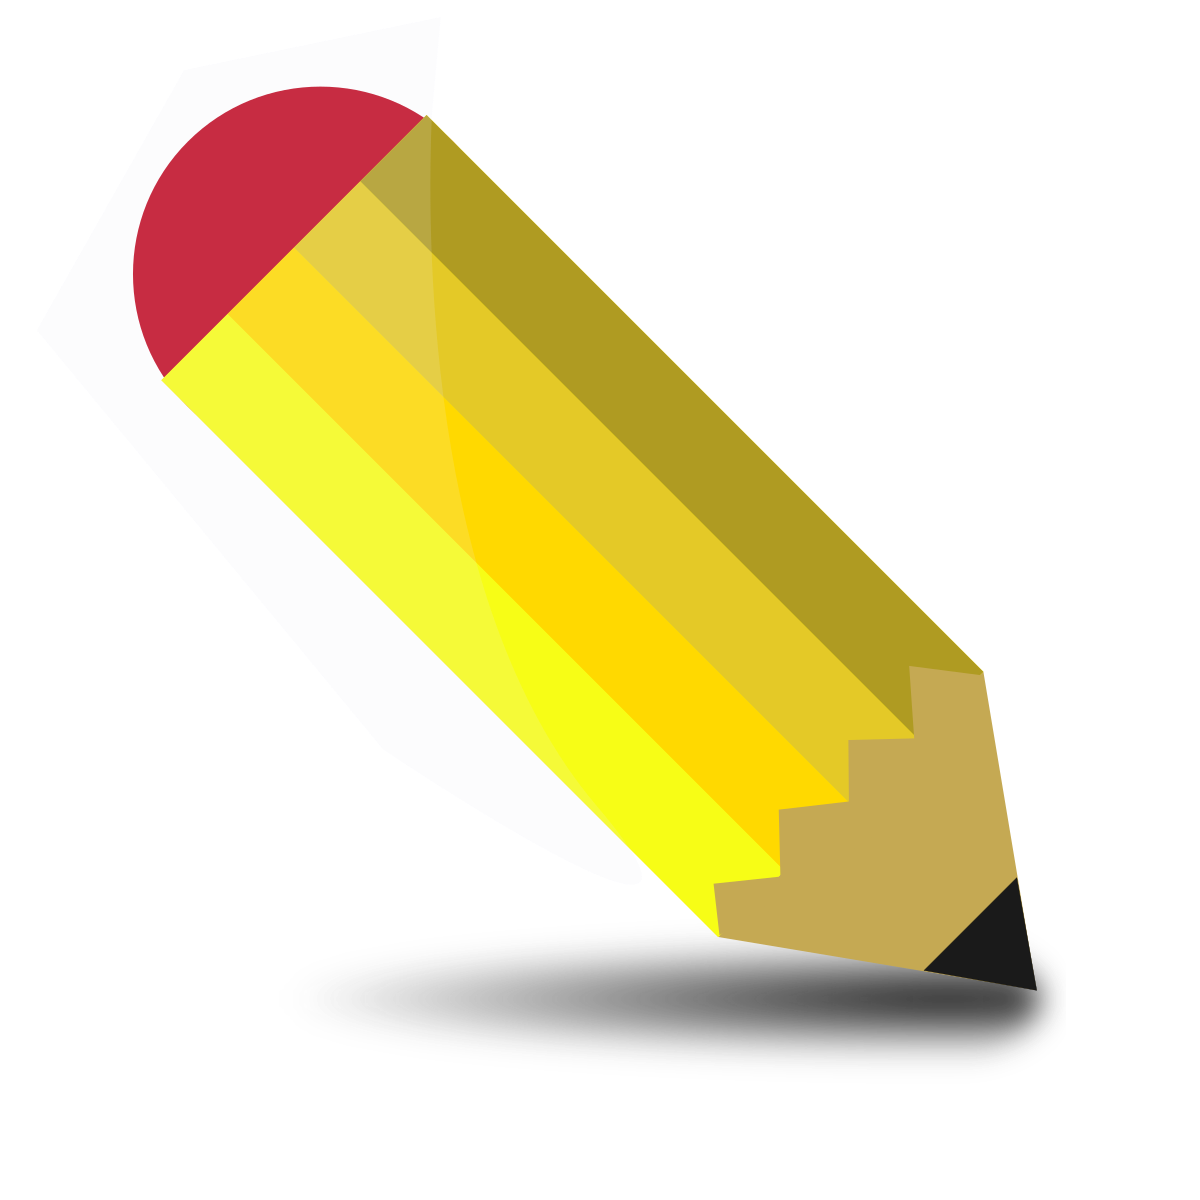 Download File:Pencil clipart.svg - Wikimedia Commons